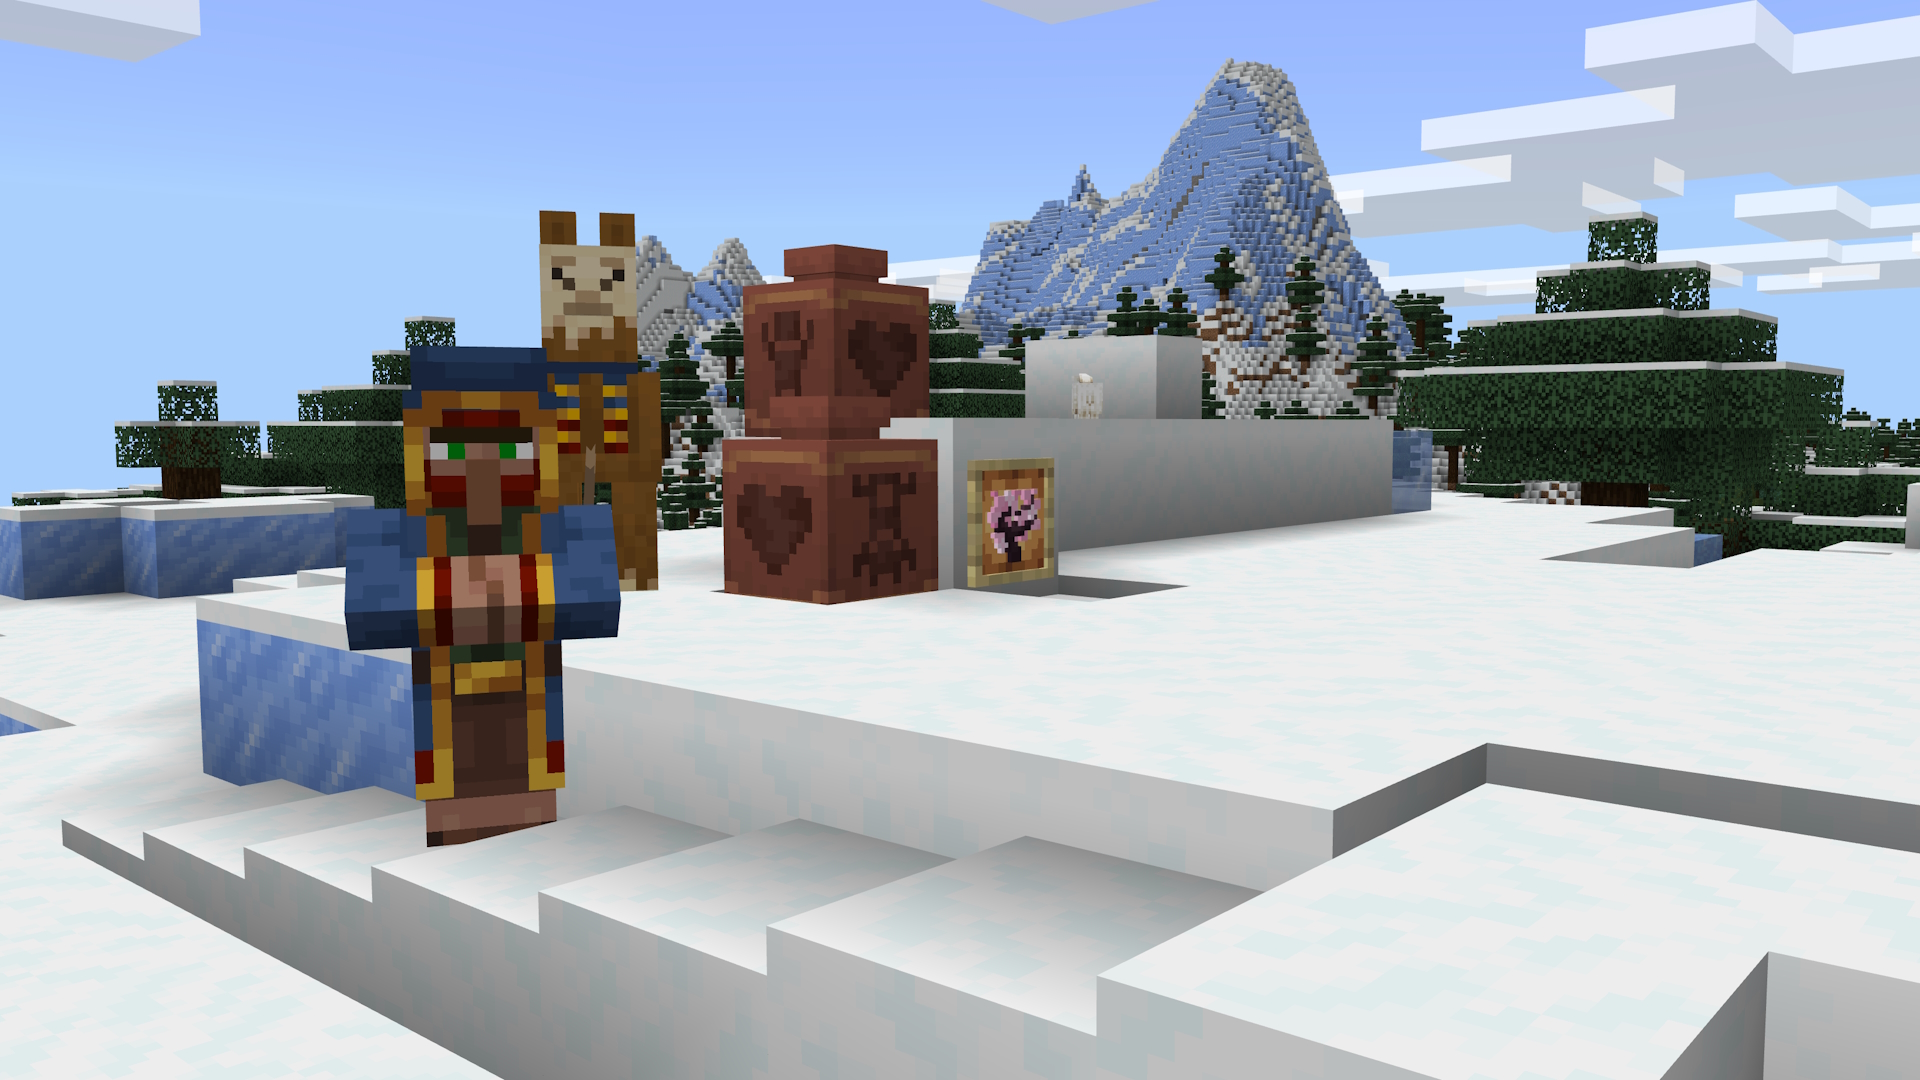 A Minecraft screenshot featuring a wandering trader and llamas, and a baby goat. The trader is standing on some stacked snow layers, and there are some decorated posts and a cherry sapling in an item frame in the scene.